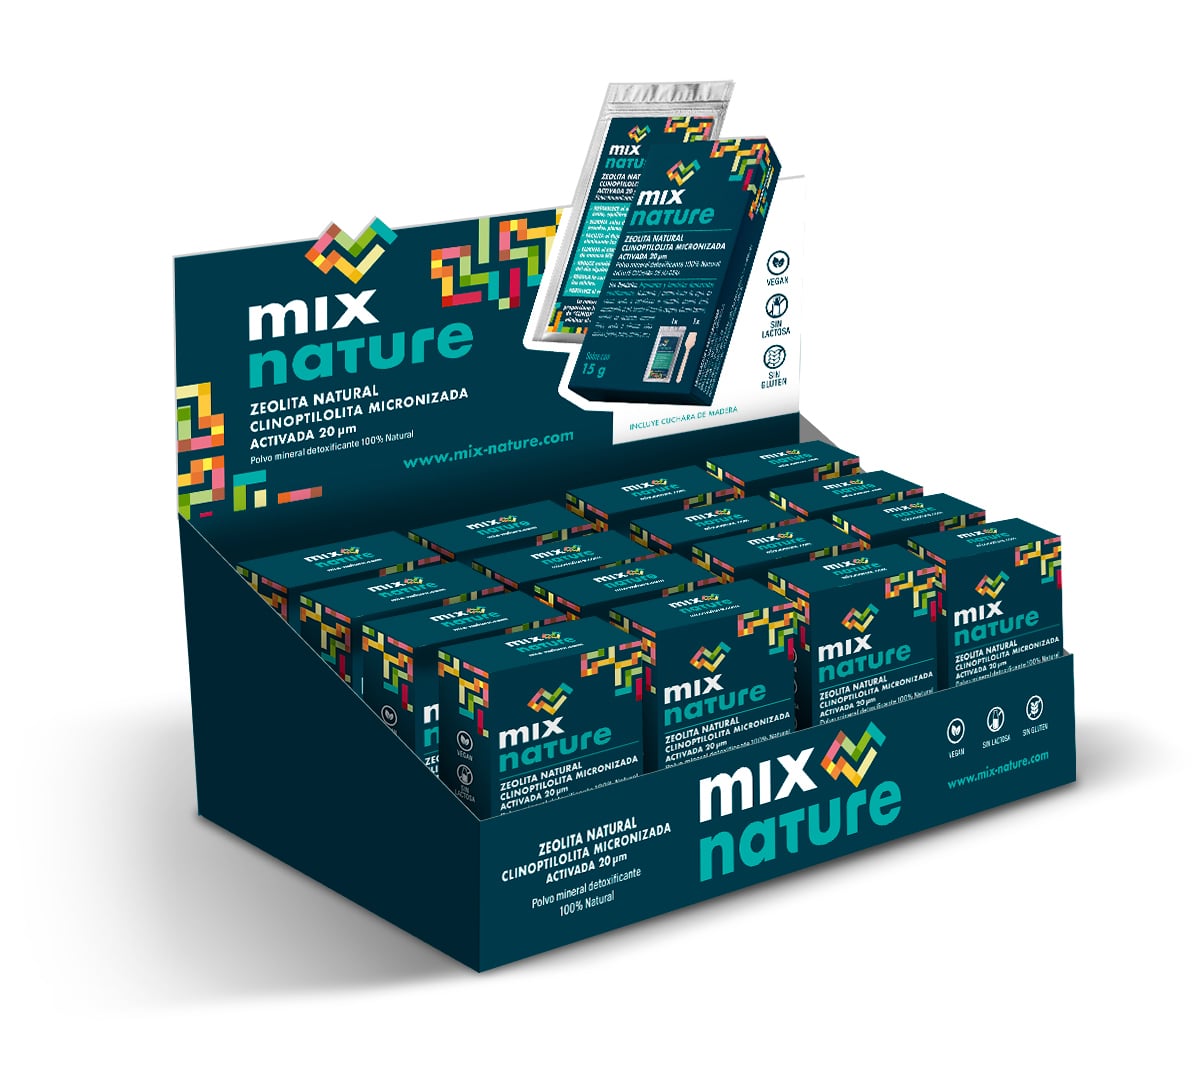 expositor mixnature